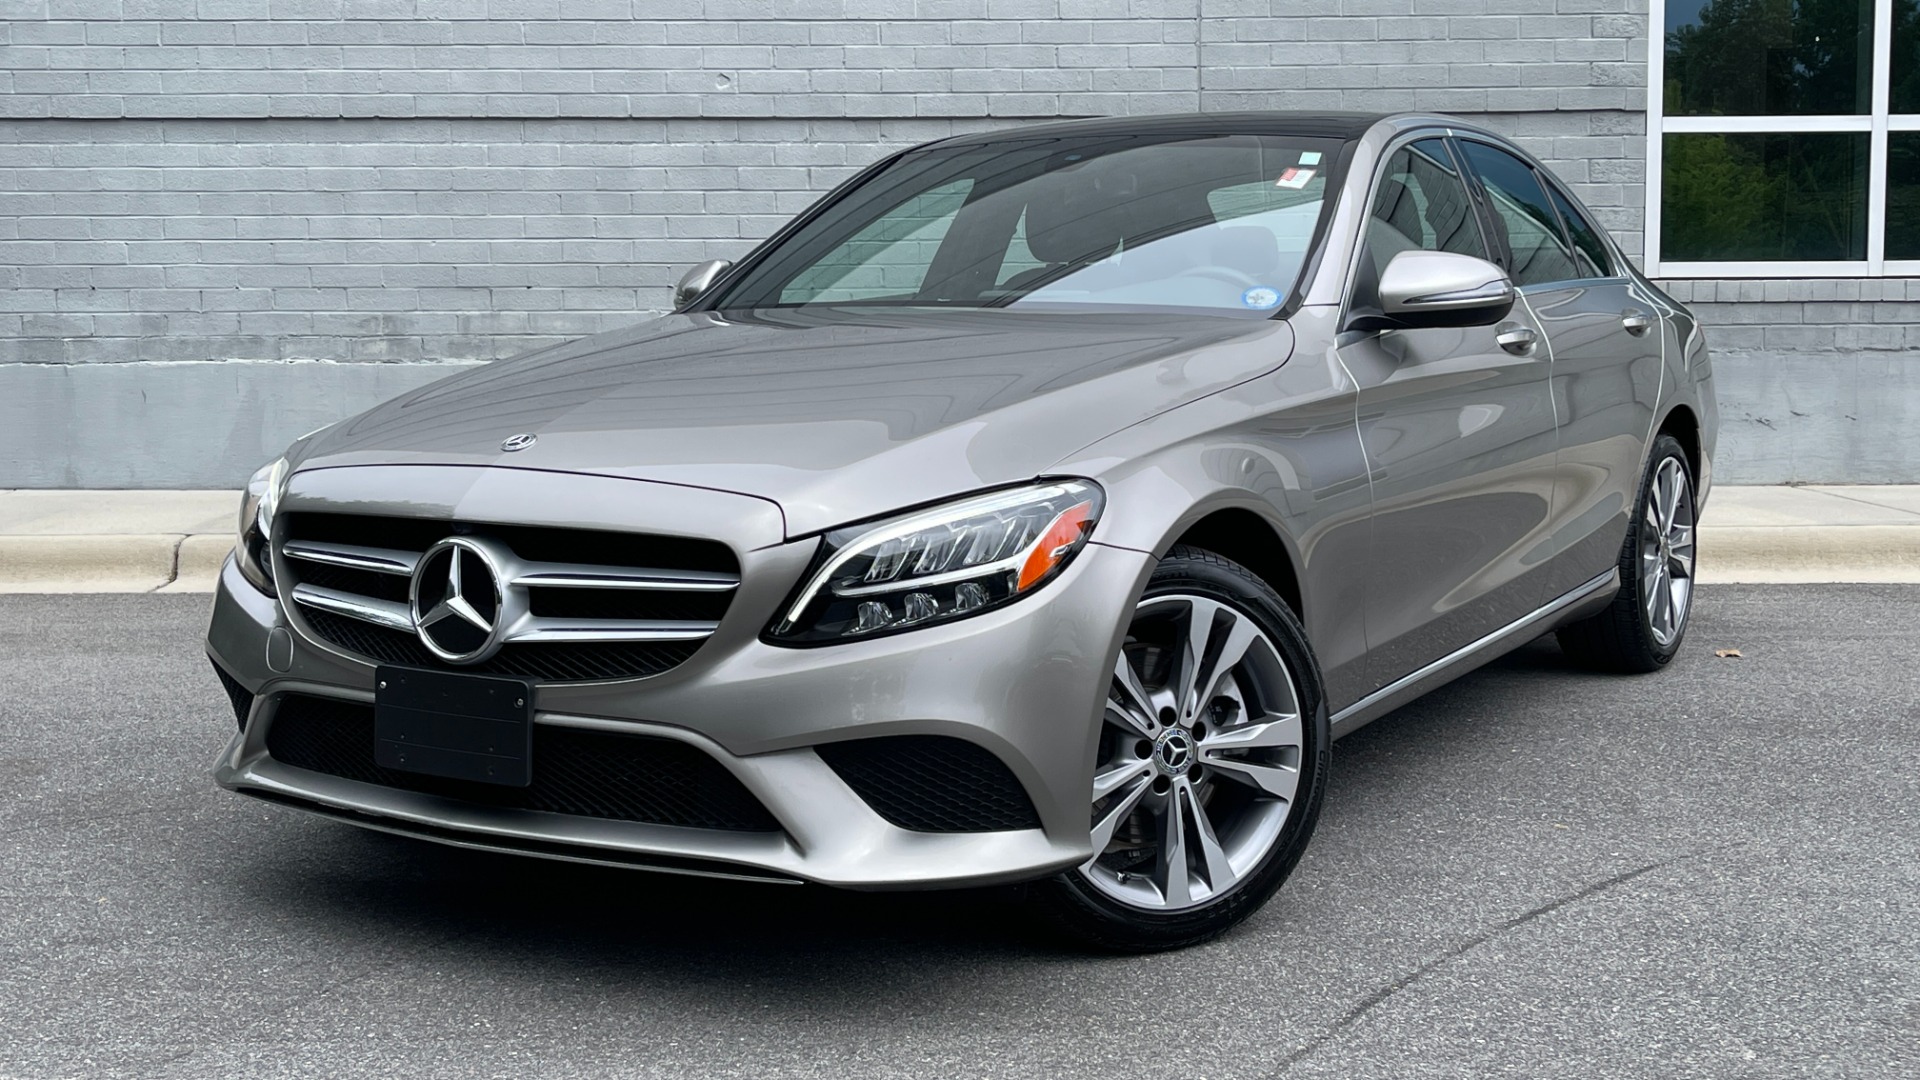 Used 2019 Mercedes-Benz C-Class C 300 / BURMESTER SOUND / PANORAMIC ROOF / WIRELESS CHARING for sale $33,995 at Formula Imports in Charlotte NC 28227 1